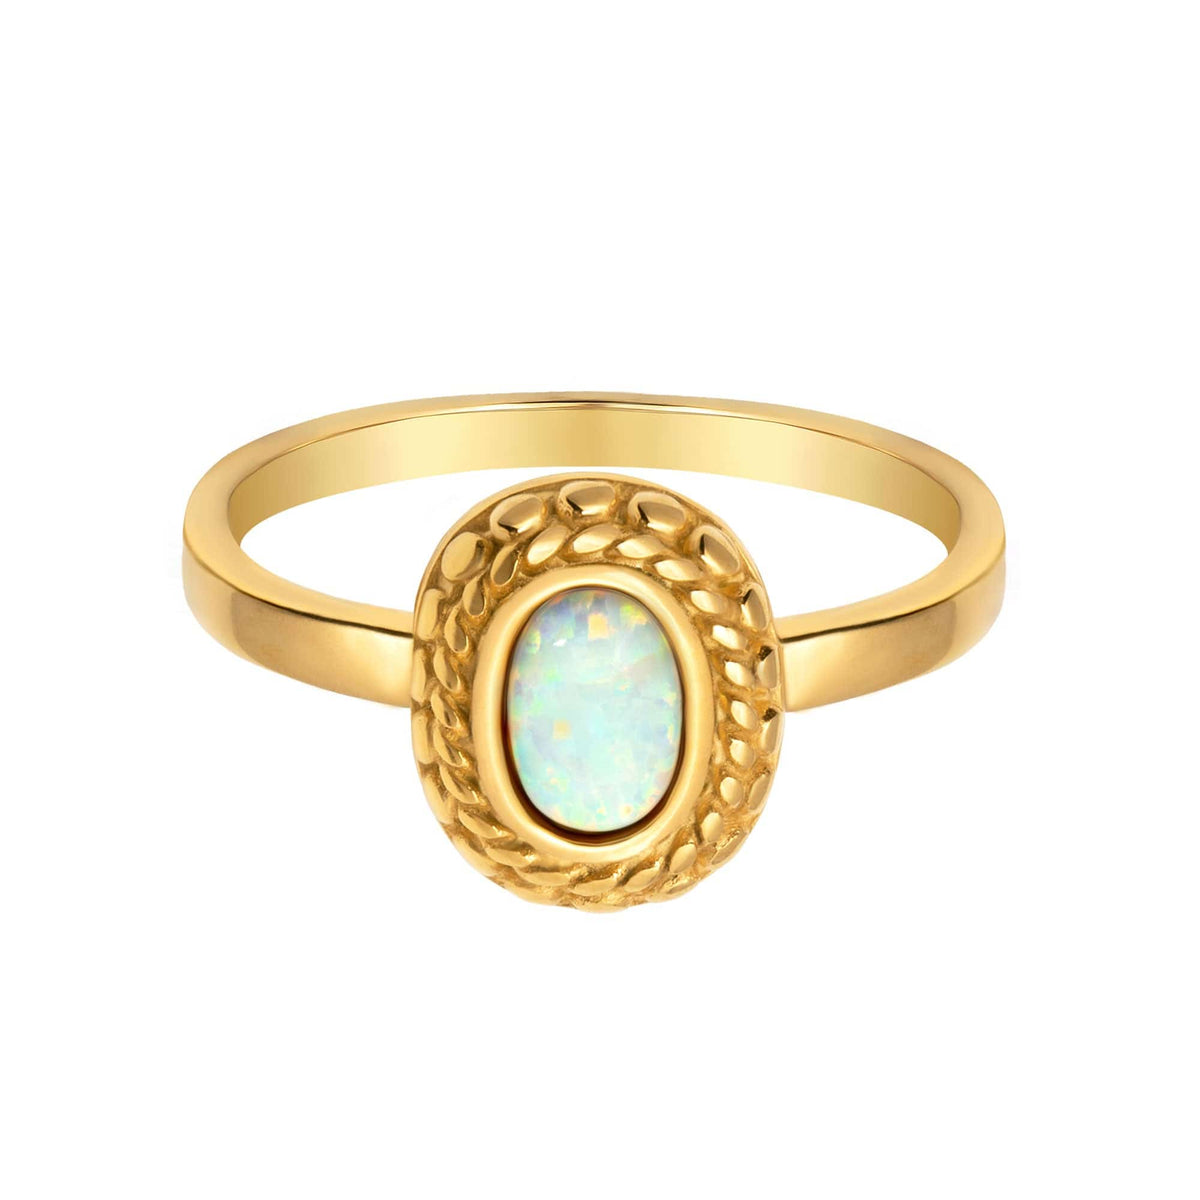 BohoMoon Stainless Steel Perrie Opal Ring Gold / US 6 / UK L / EUR 51 (small)